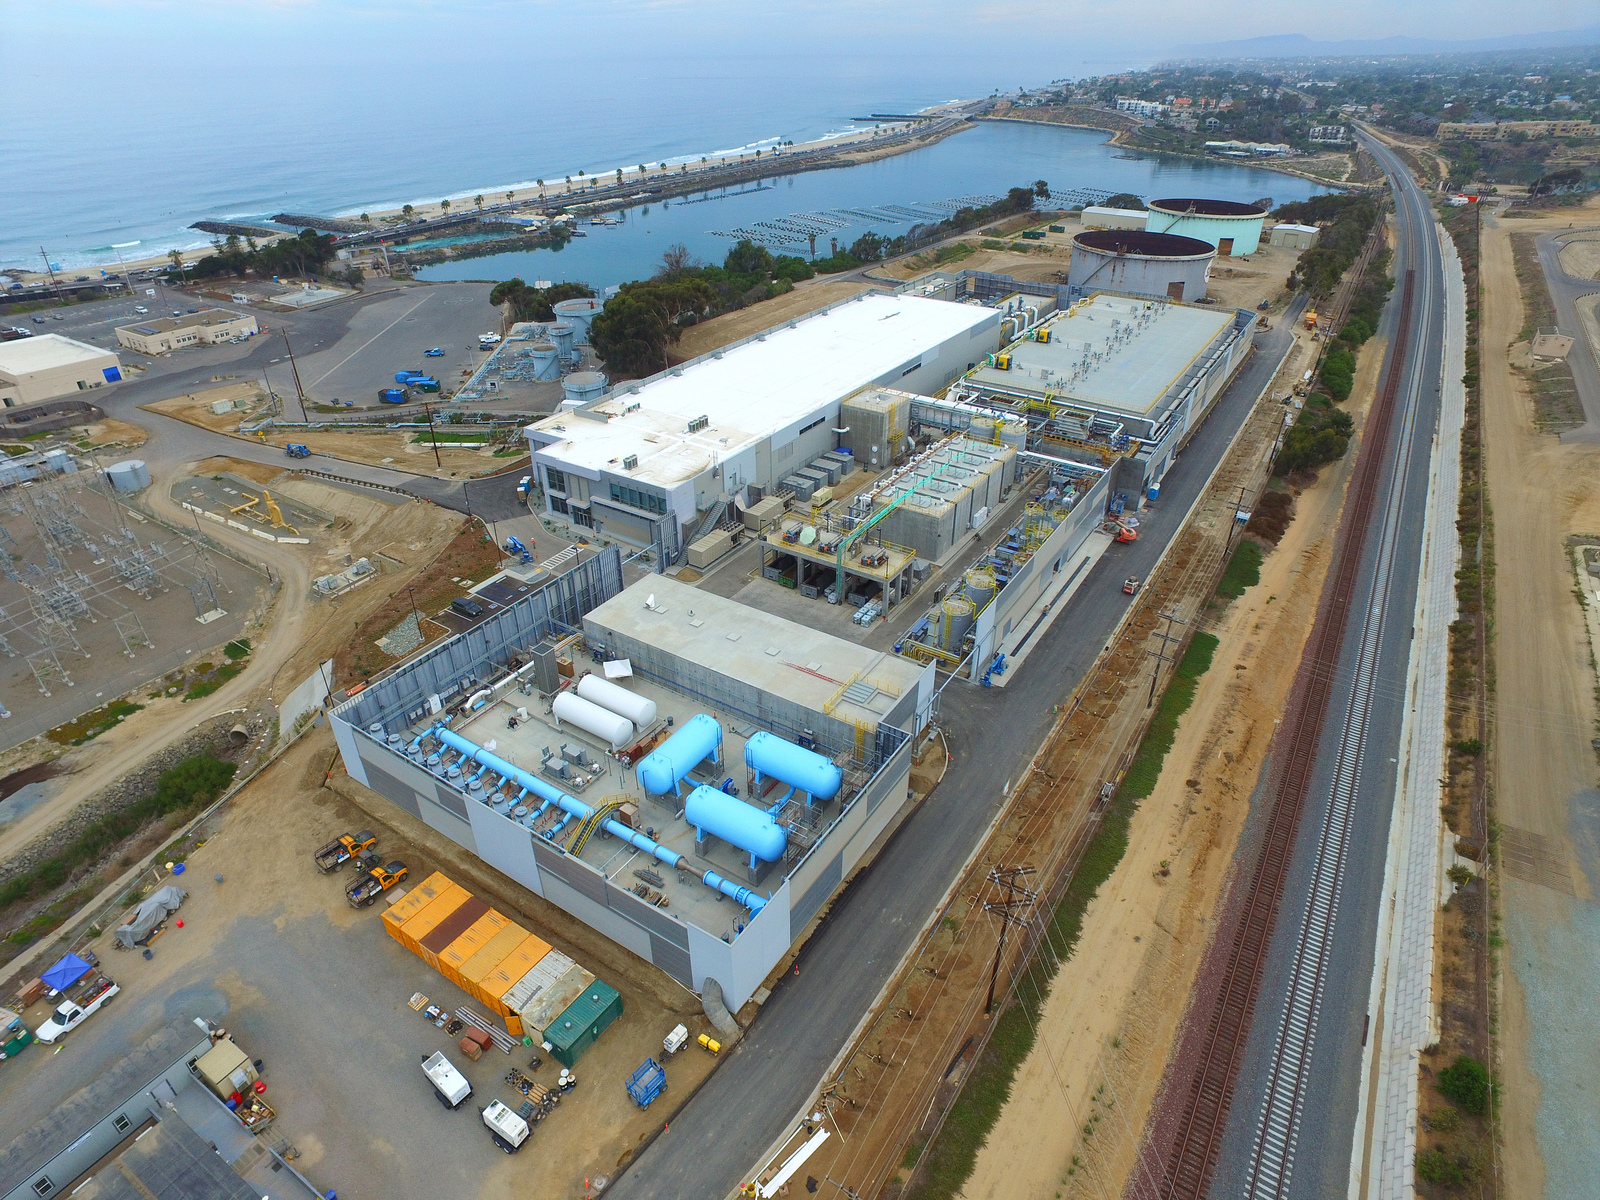 The massive new Carlsbad desalination plant is the biggest in the country, capable of supplying water to around 7 percent of the population of San Diego County.